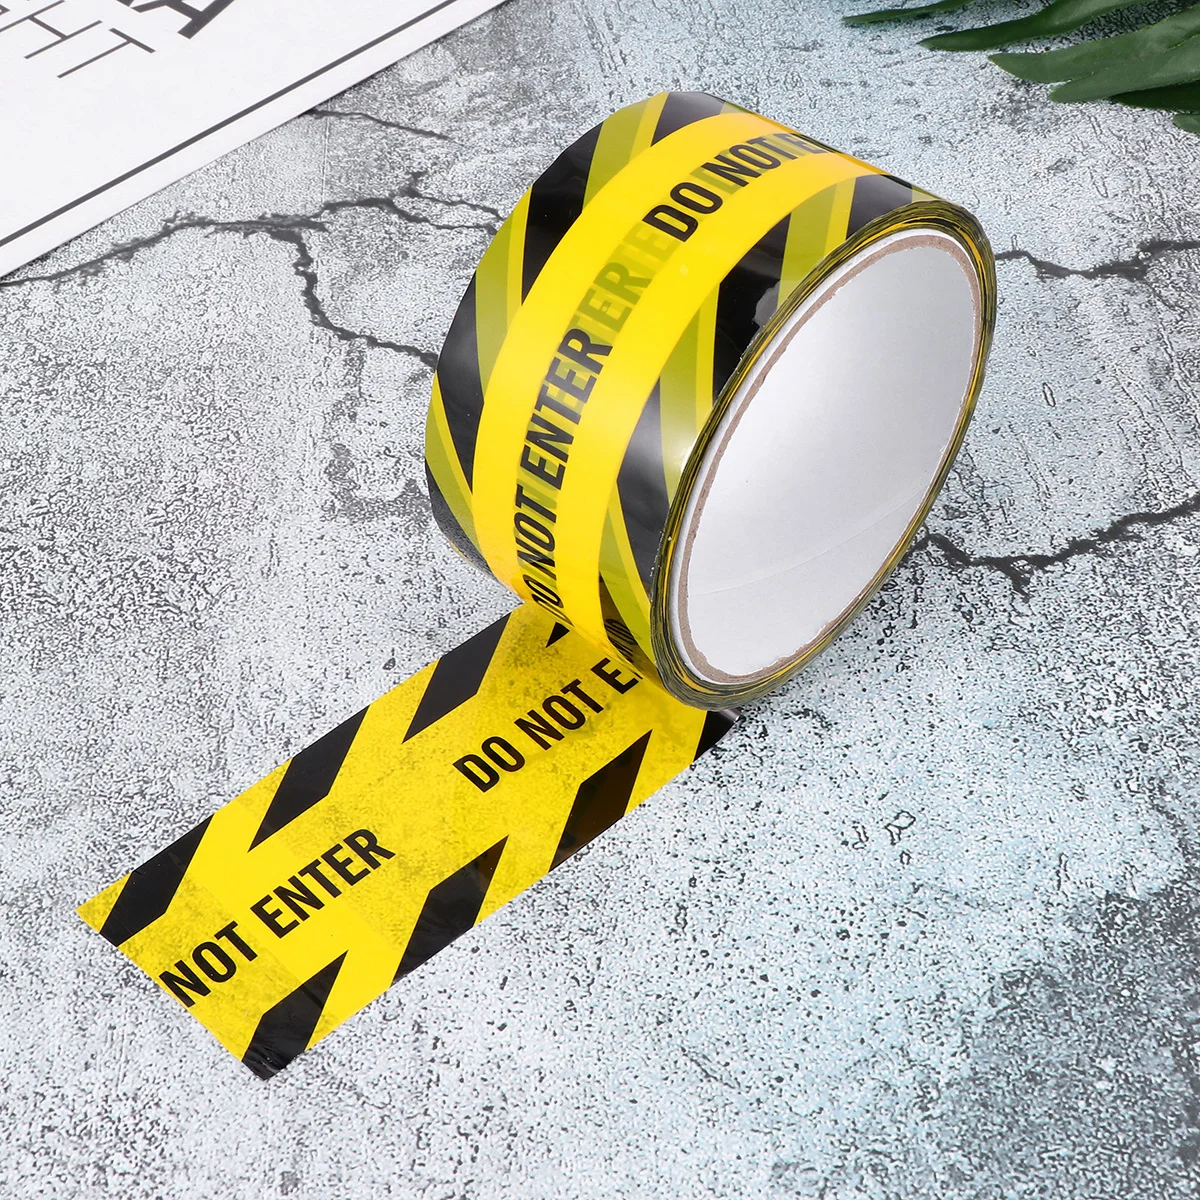 

1 Roll Do Not Enter Safety Tape Safe Self Adhesive Sticker Warning Tape Masking Tape Safety Stripes Tape for Walls Floors Pipes